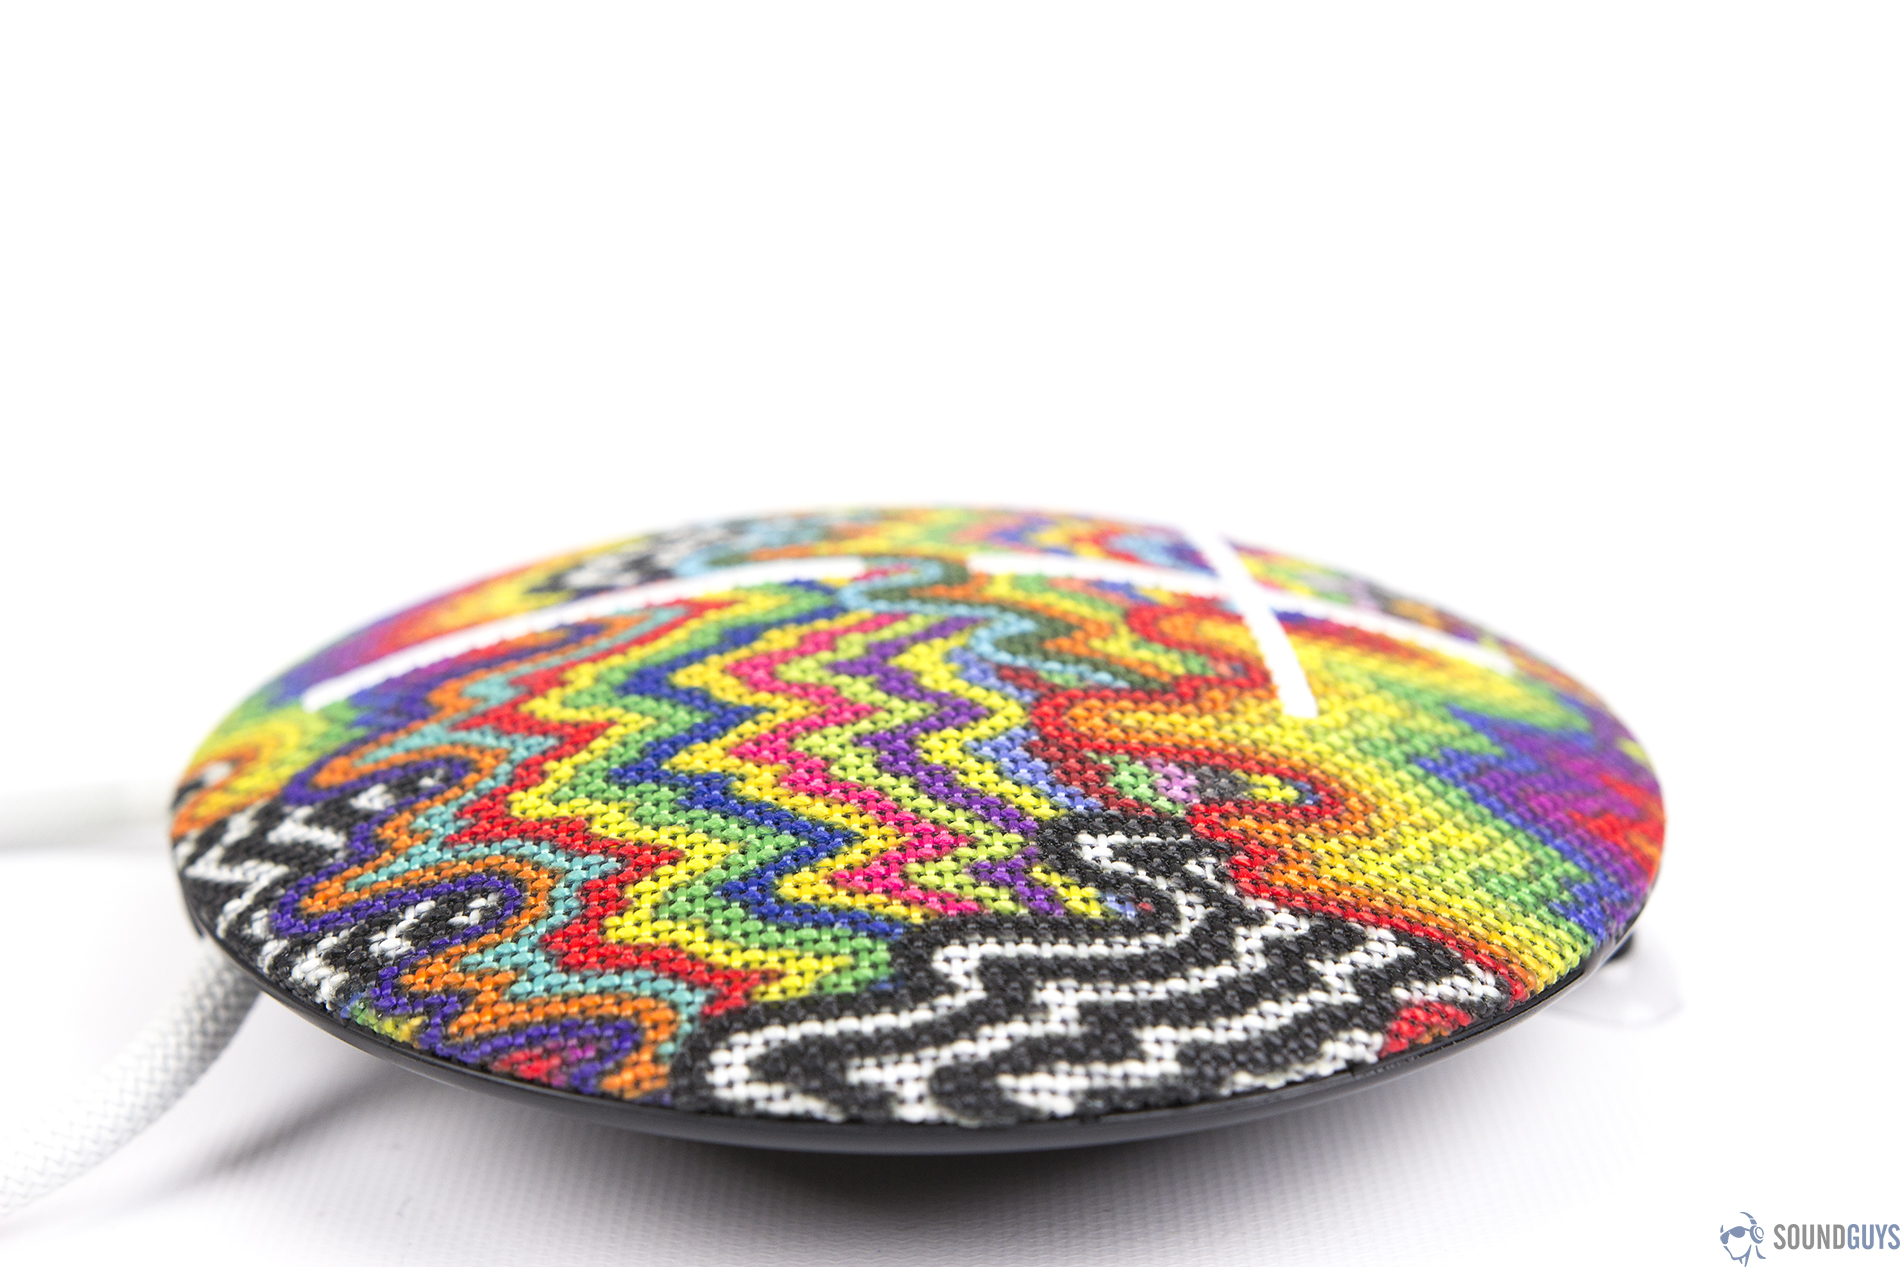 A lateral, straight-on view of a rainbow-patterned UE Roll 2 on a white background.